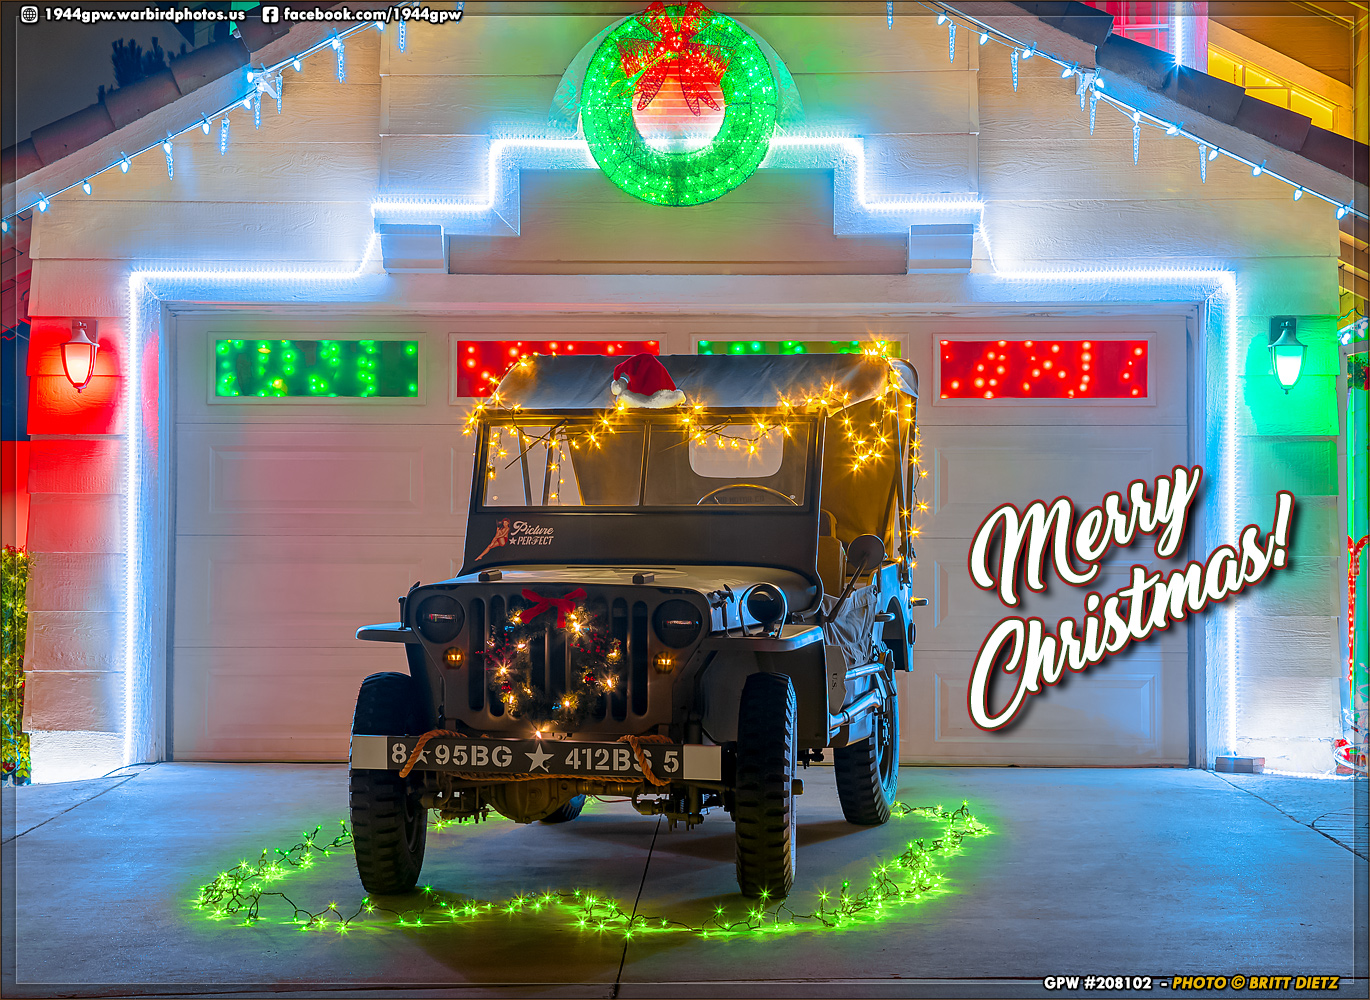 Merry Christmas 2021 from GPW Jeep #208102!